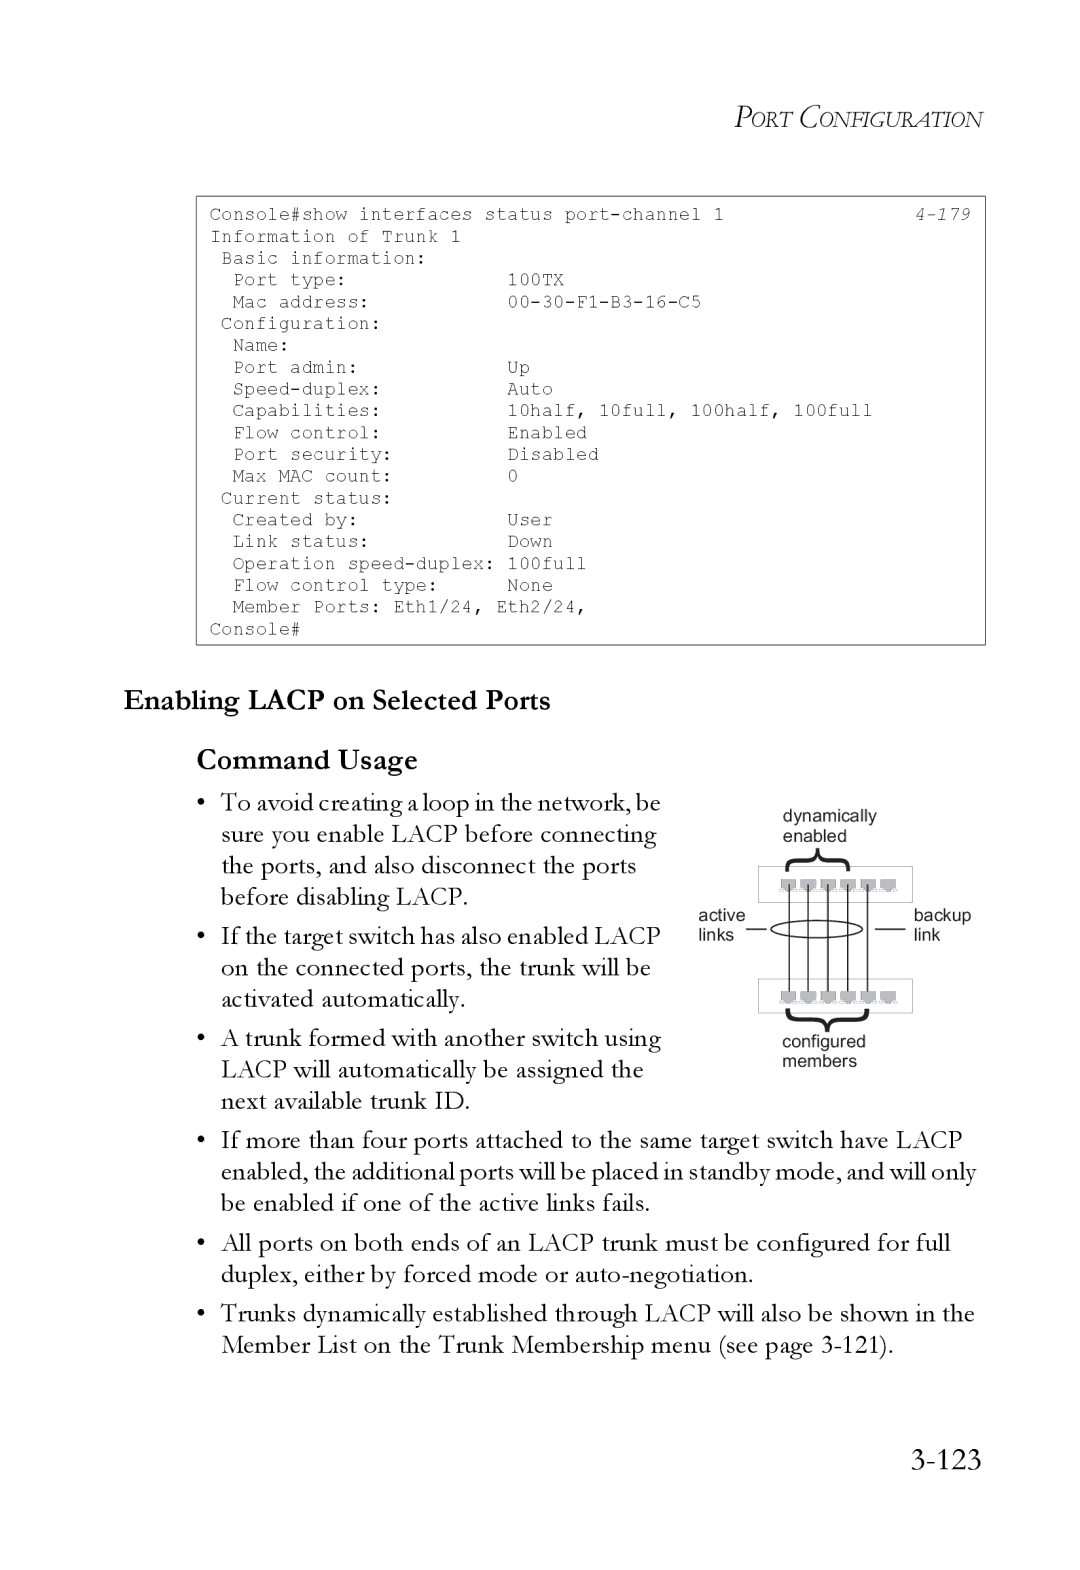 SMC Networks SMC6824M manual 123, Enabling Lacp on Selected Ports Command Usage 